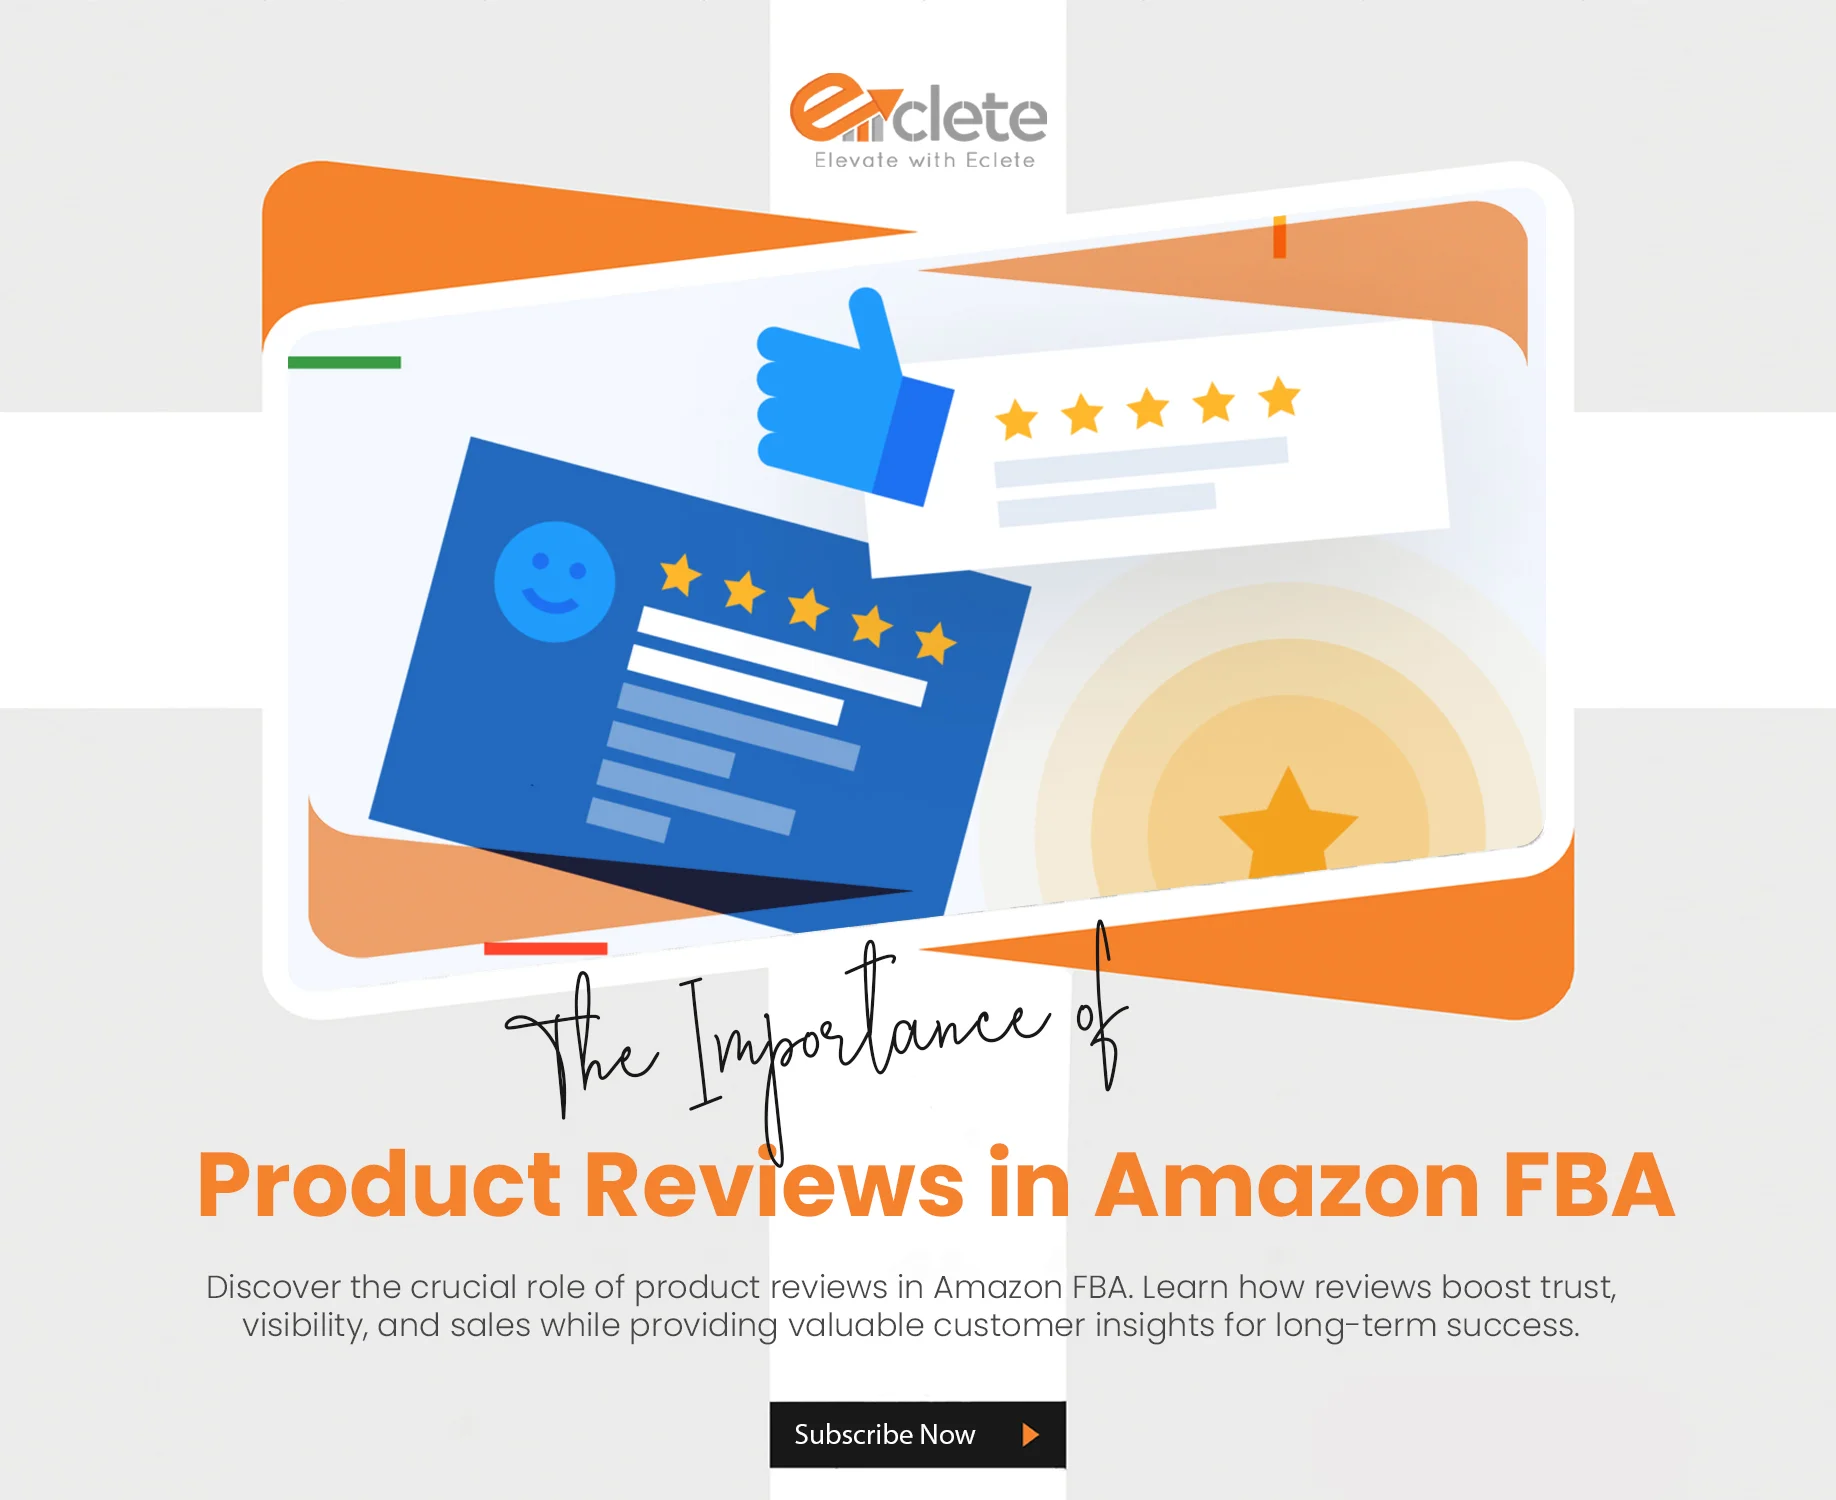 Product Reviews in Amazon FBA